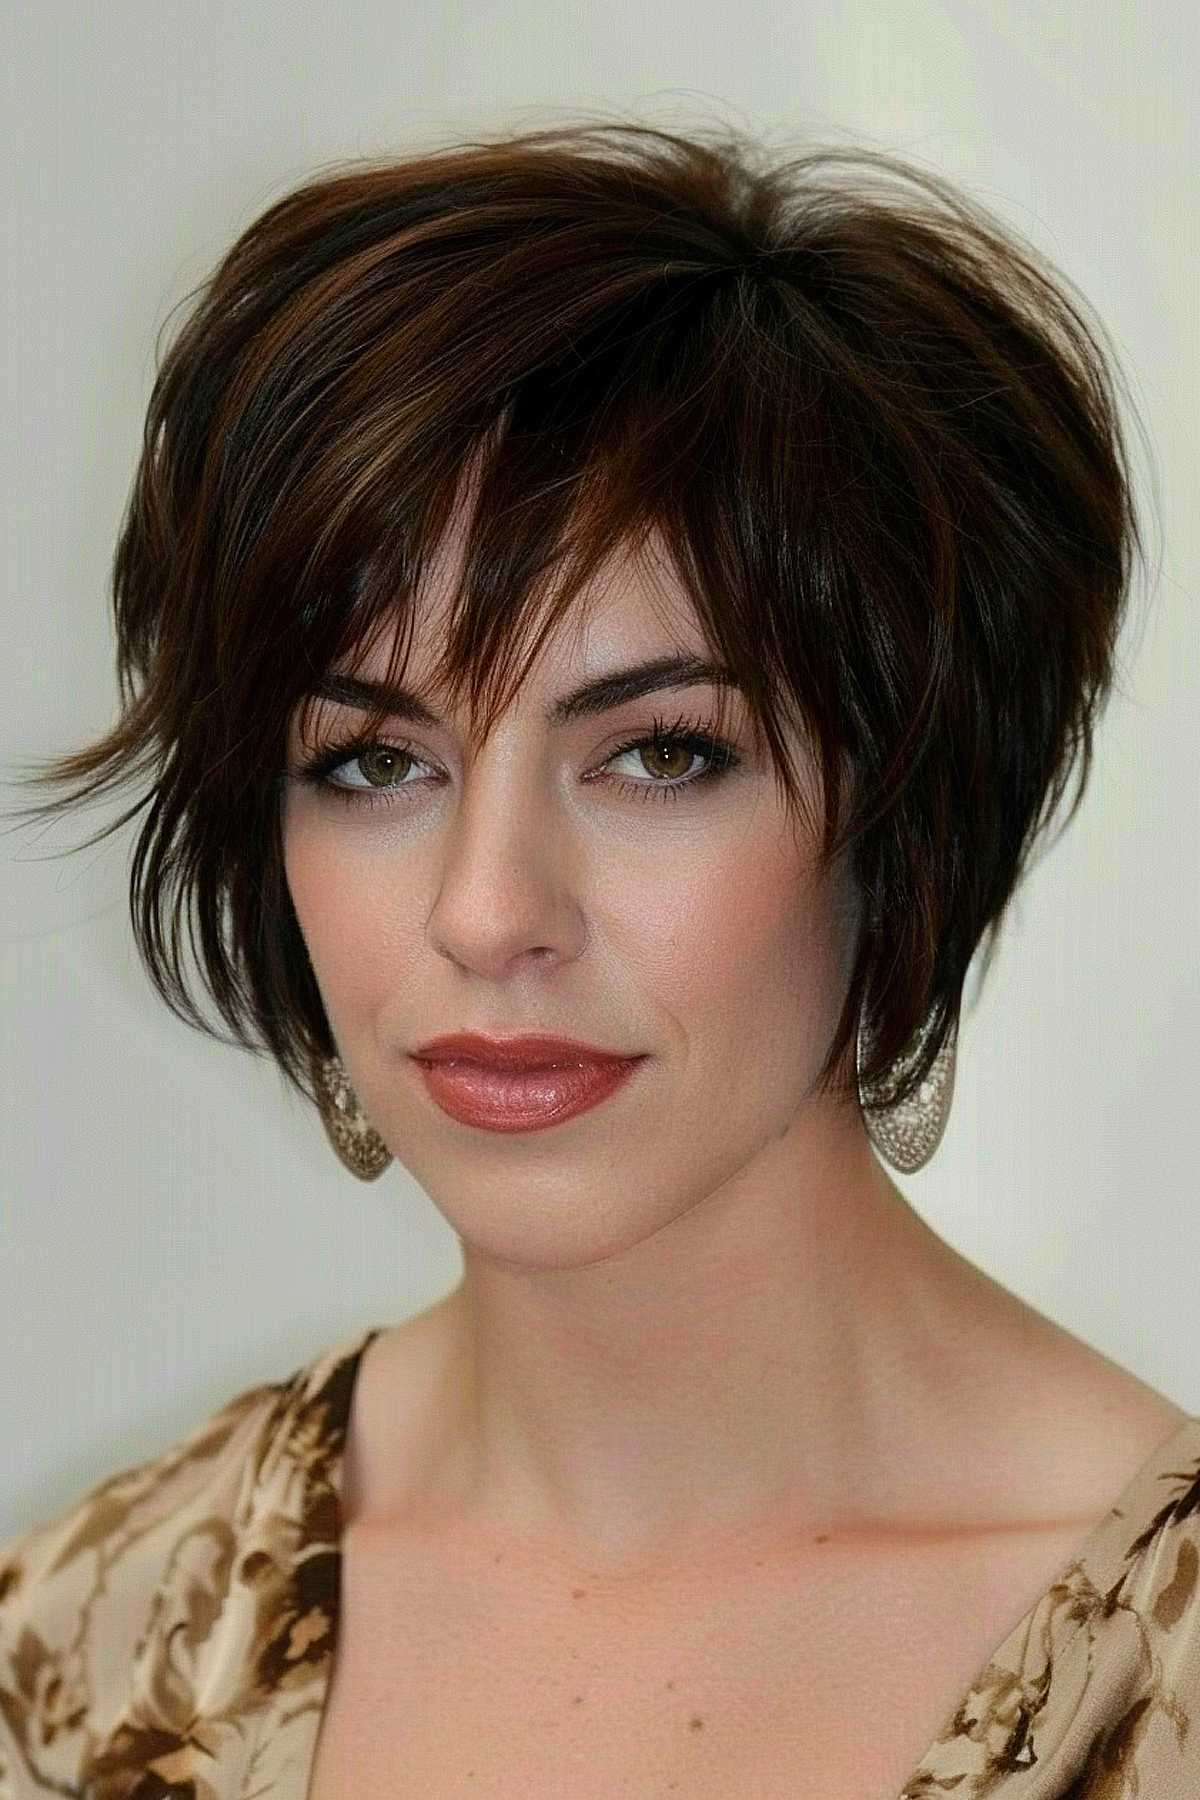 Pixie bob elf blend haircut with rich brunette shade, featuring longer front layers tapering towards the back.